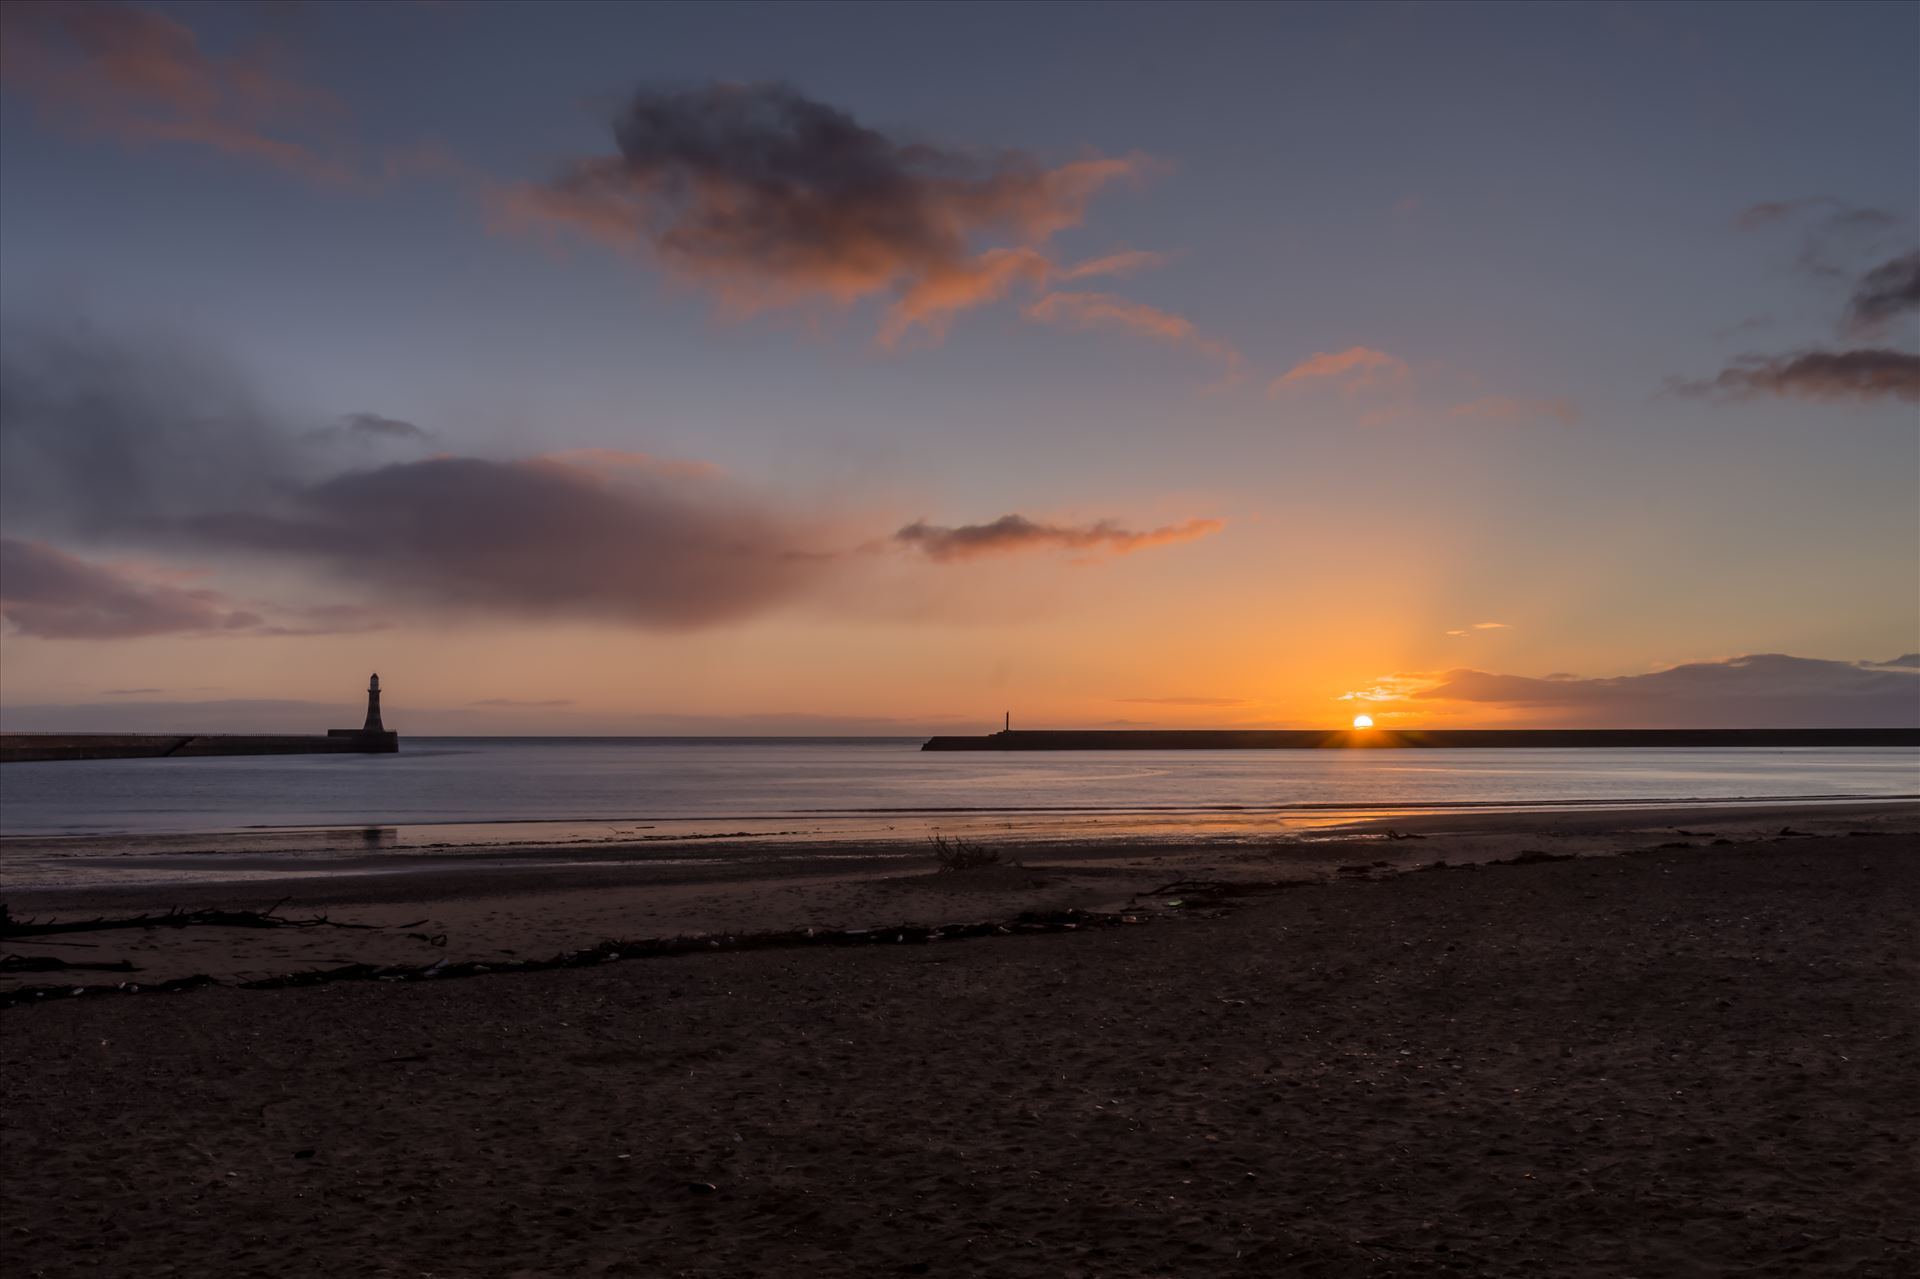 Roker pier at sunrise - The first sunrise of 2018 at Roker Pier, Sunderland by philreay